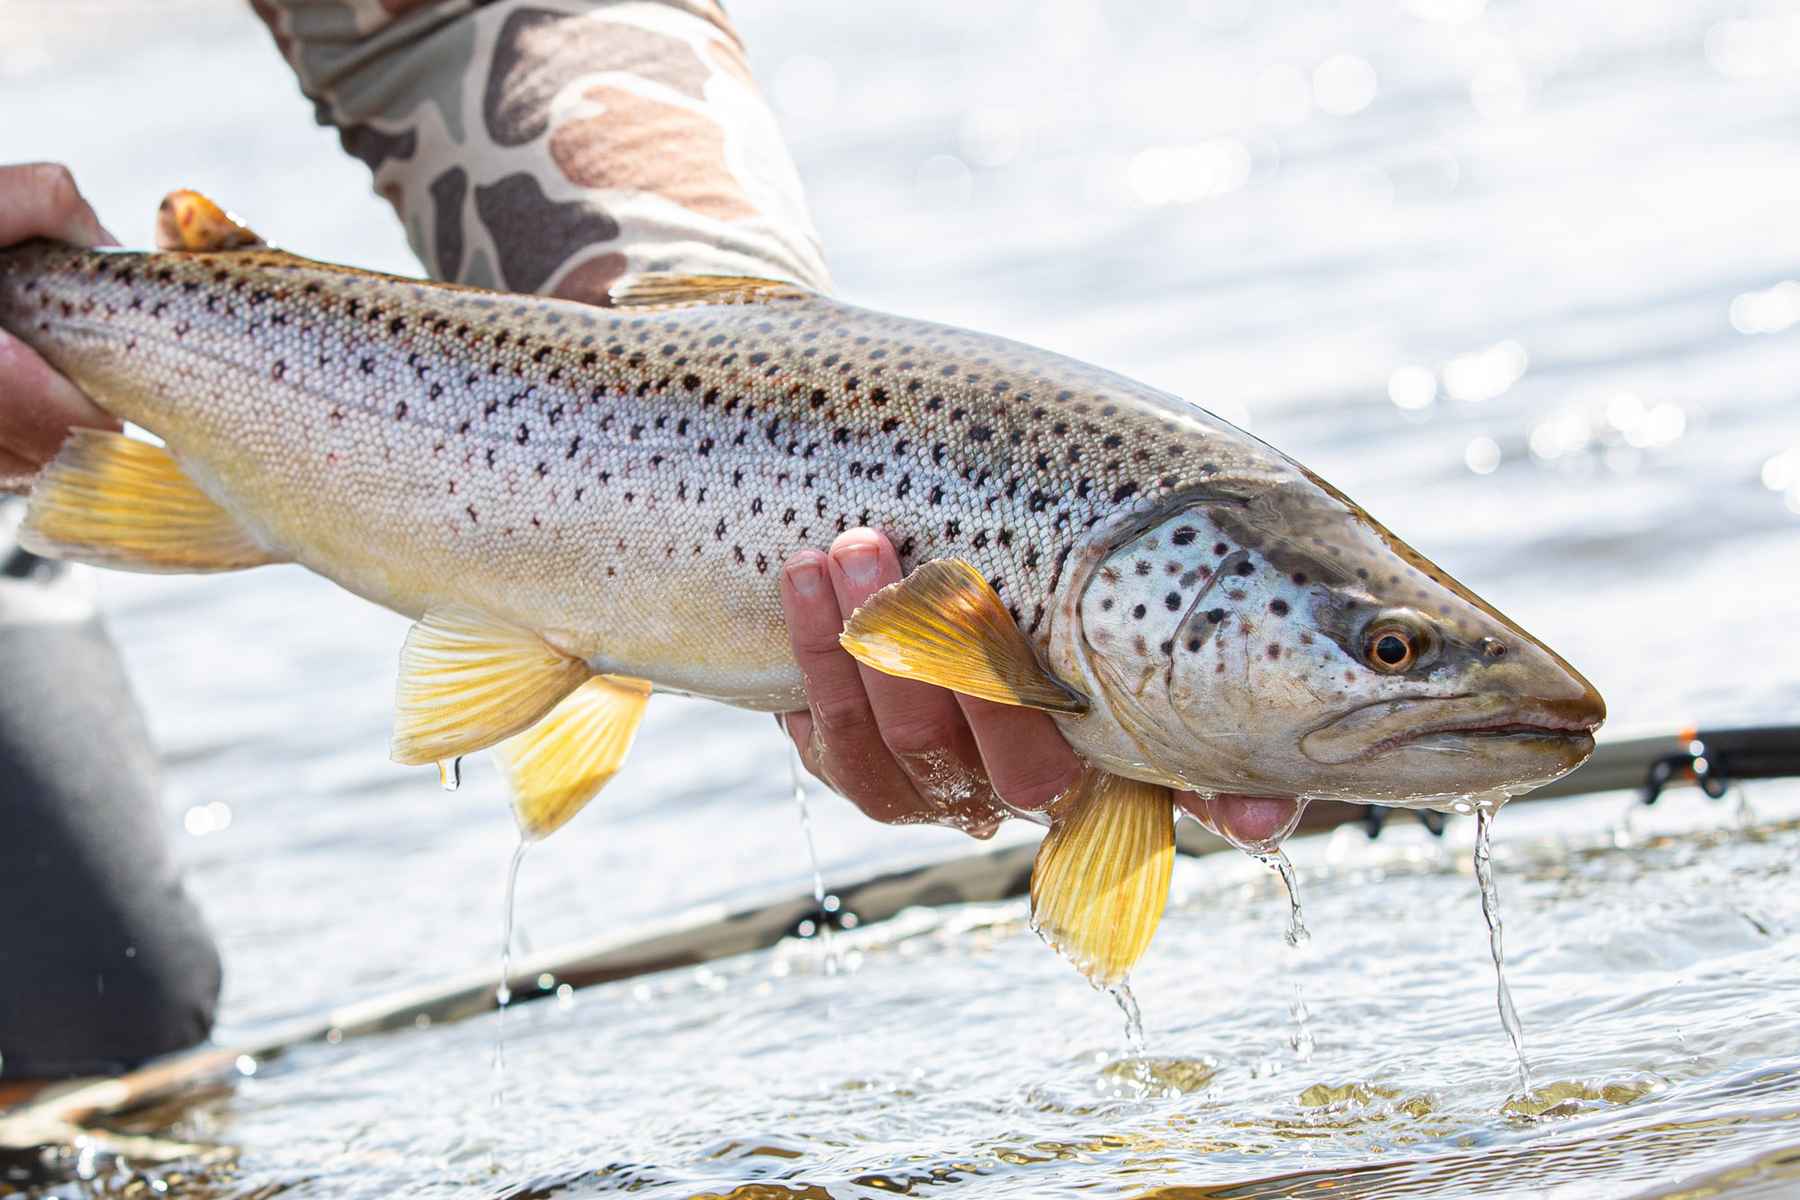 http://www.hatchmag.com/sites/default/files/styles/extra-large/public/field/image/553A8908-2.jpg